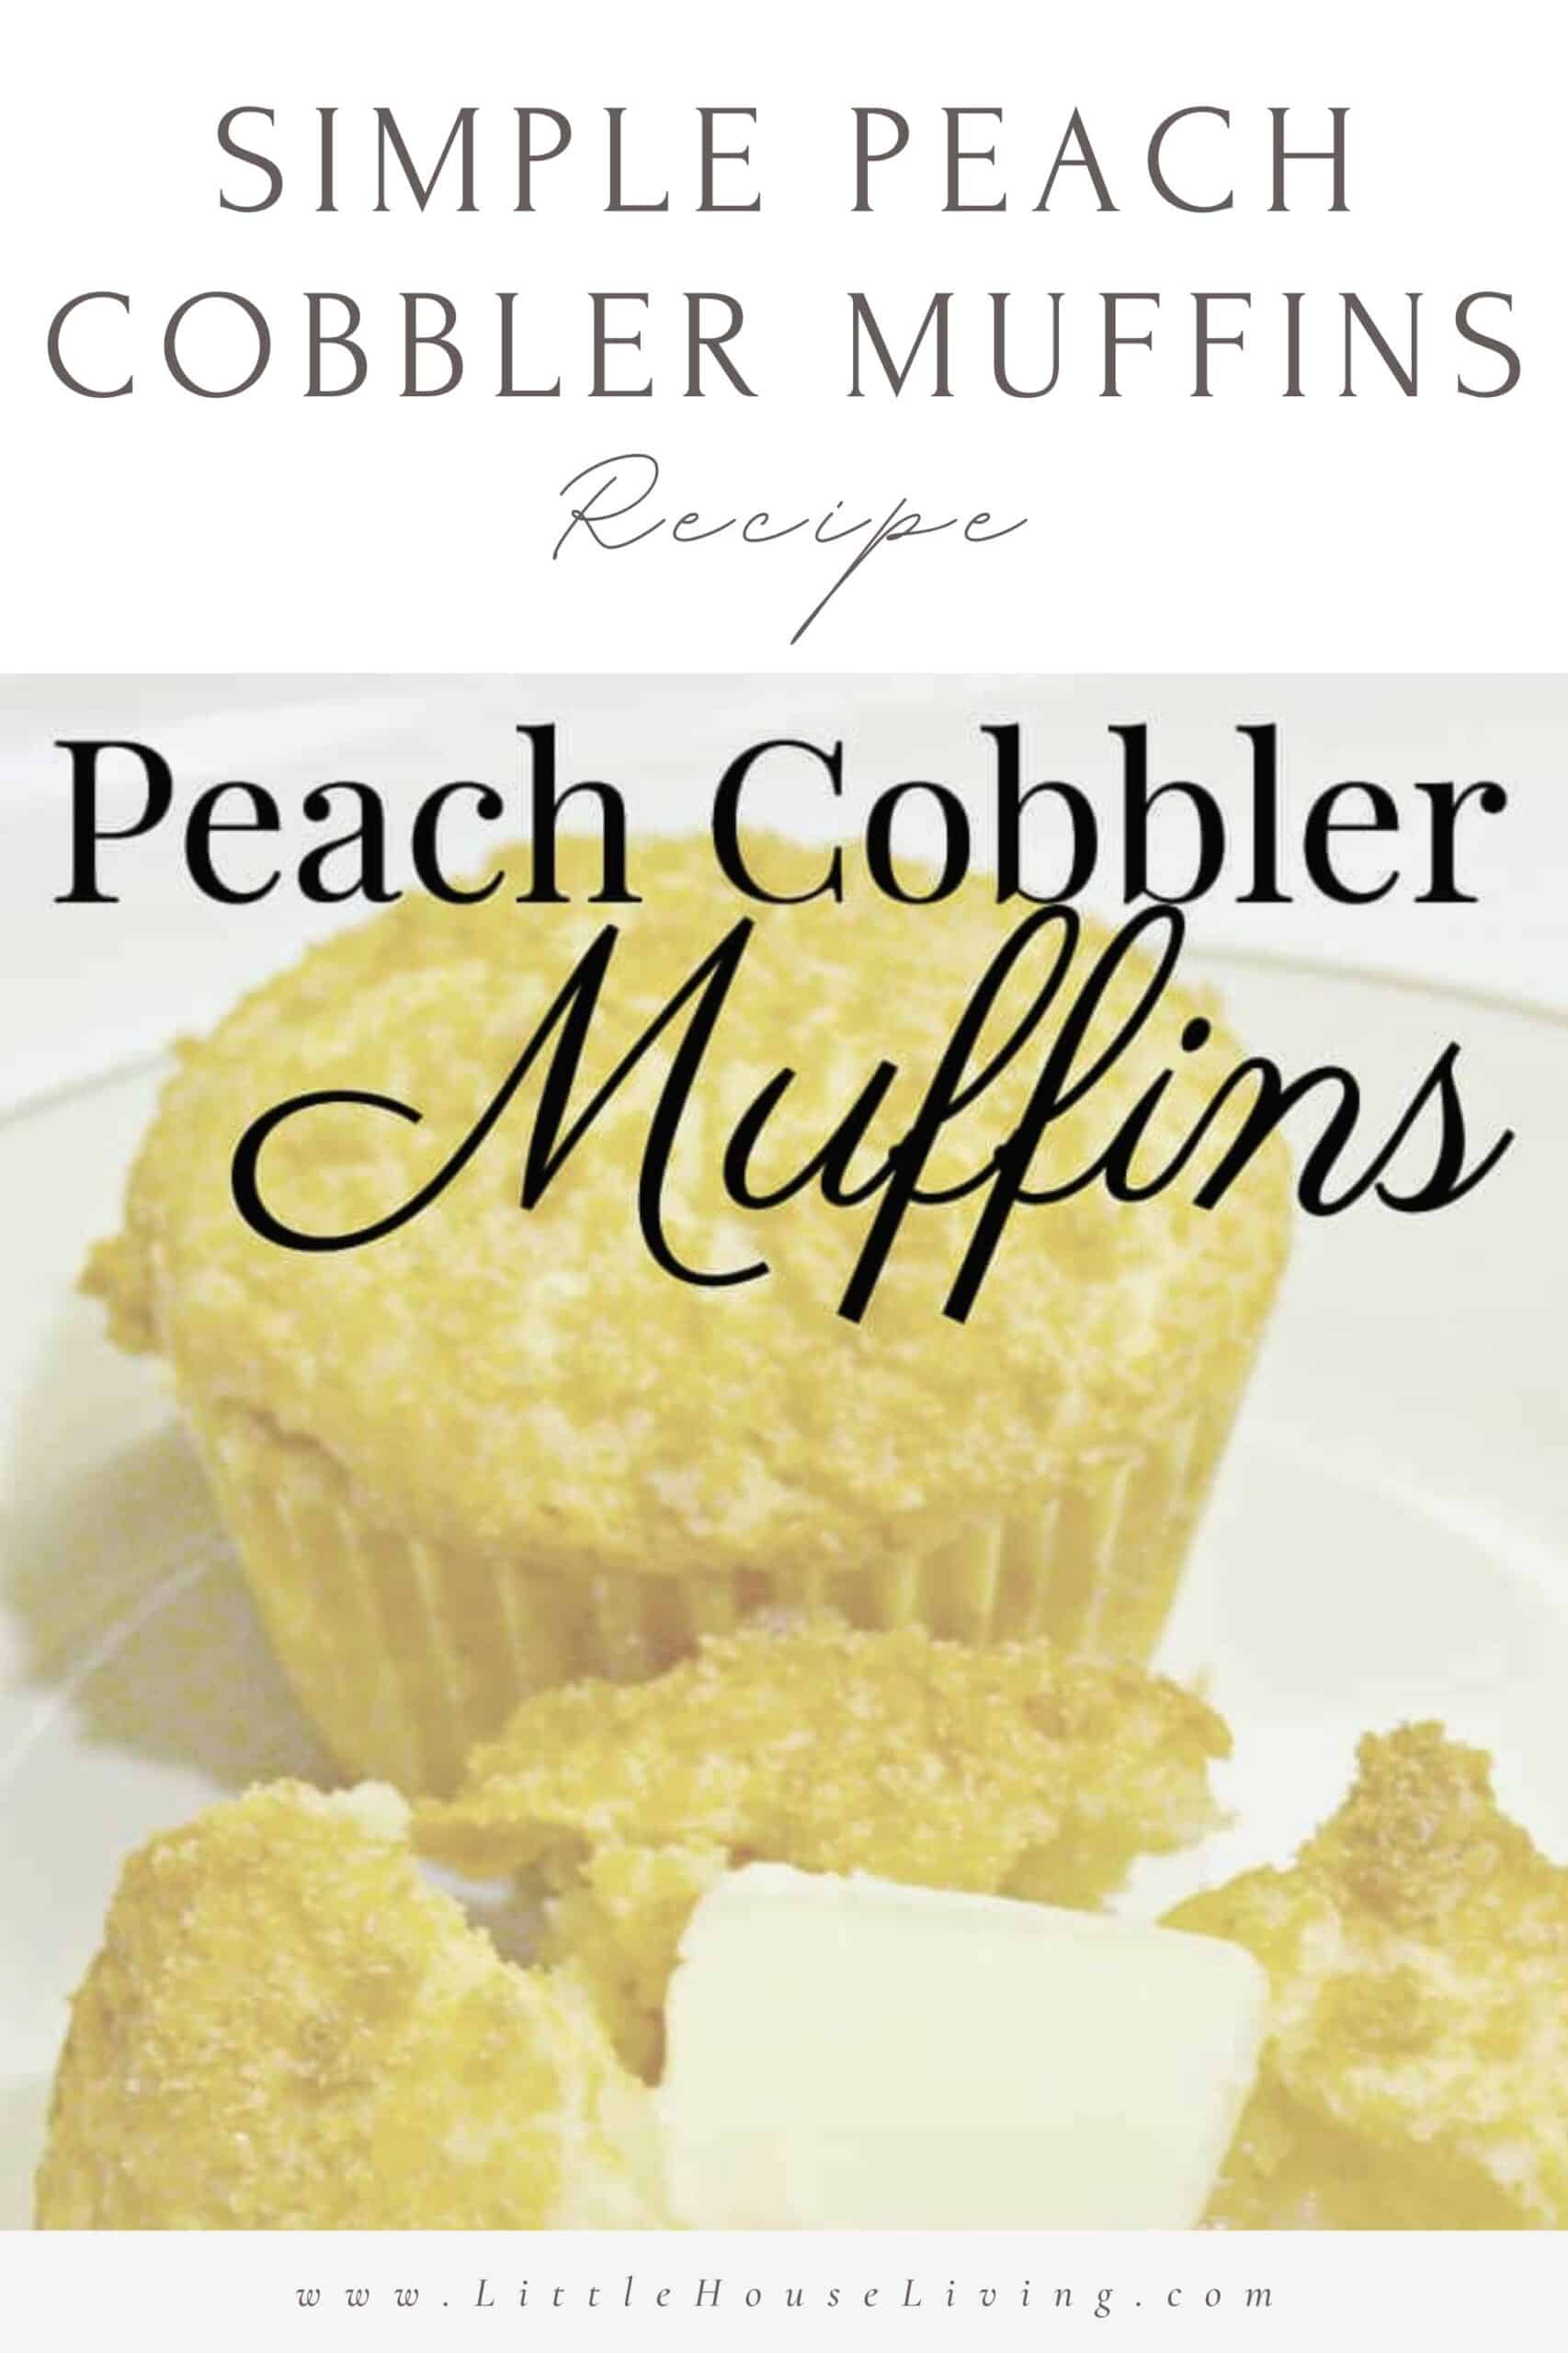 Need a yummy new muffin recipe that the whole family will enjoy? These Peach Cobbler Muffins are quick and easy and will remind you of summer goodness.